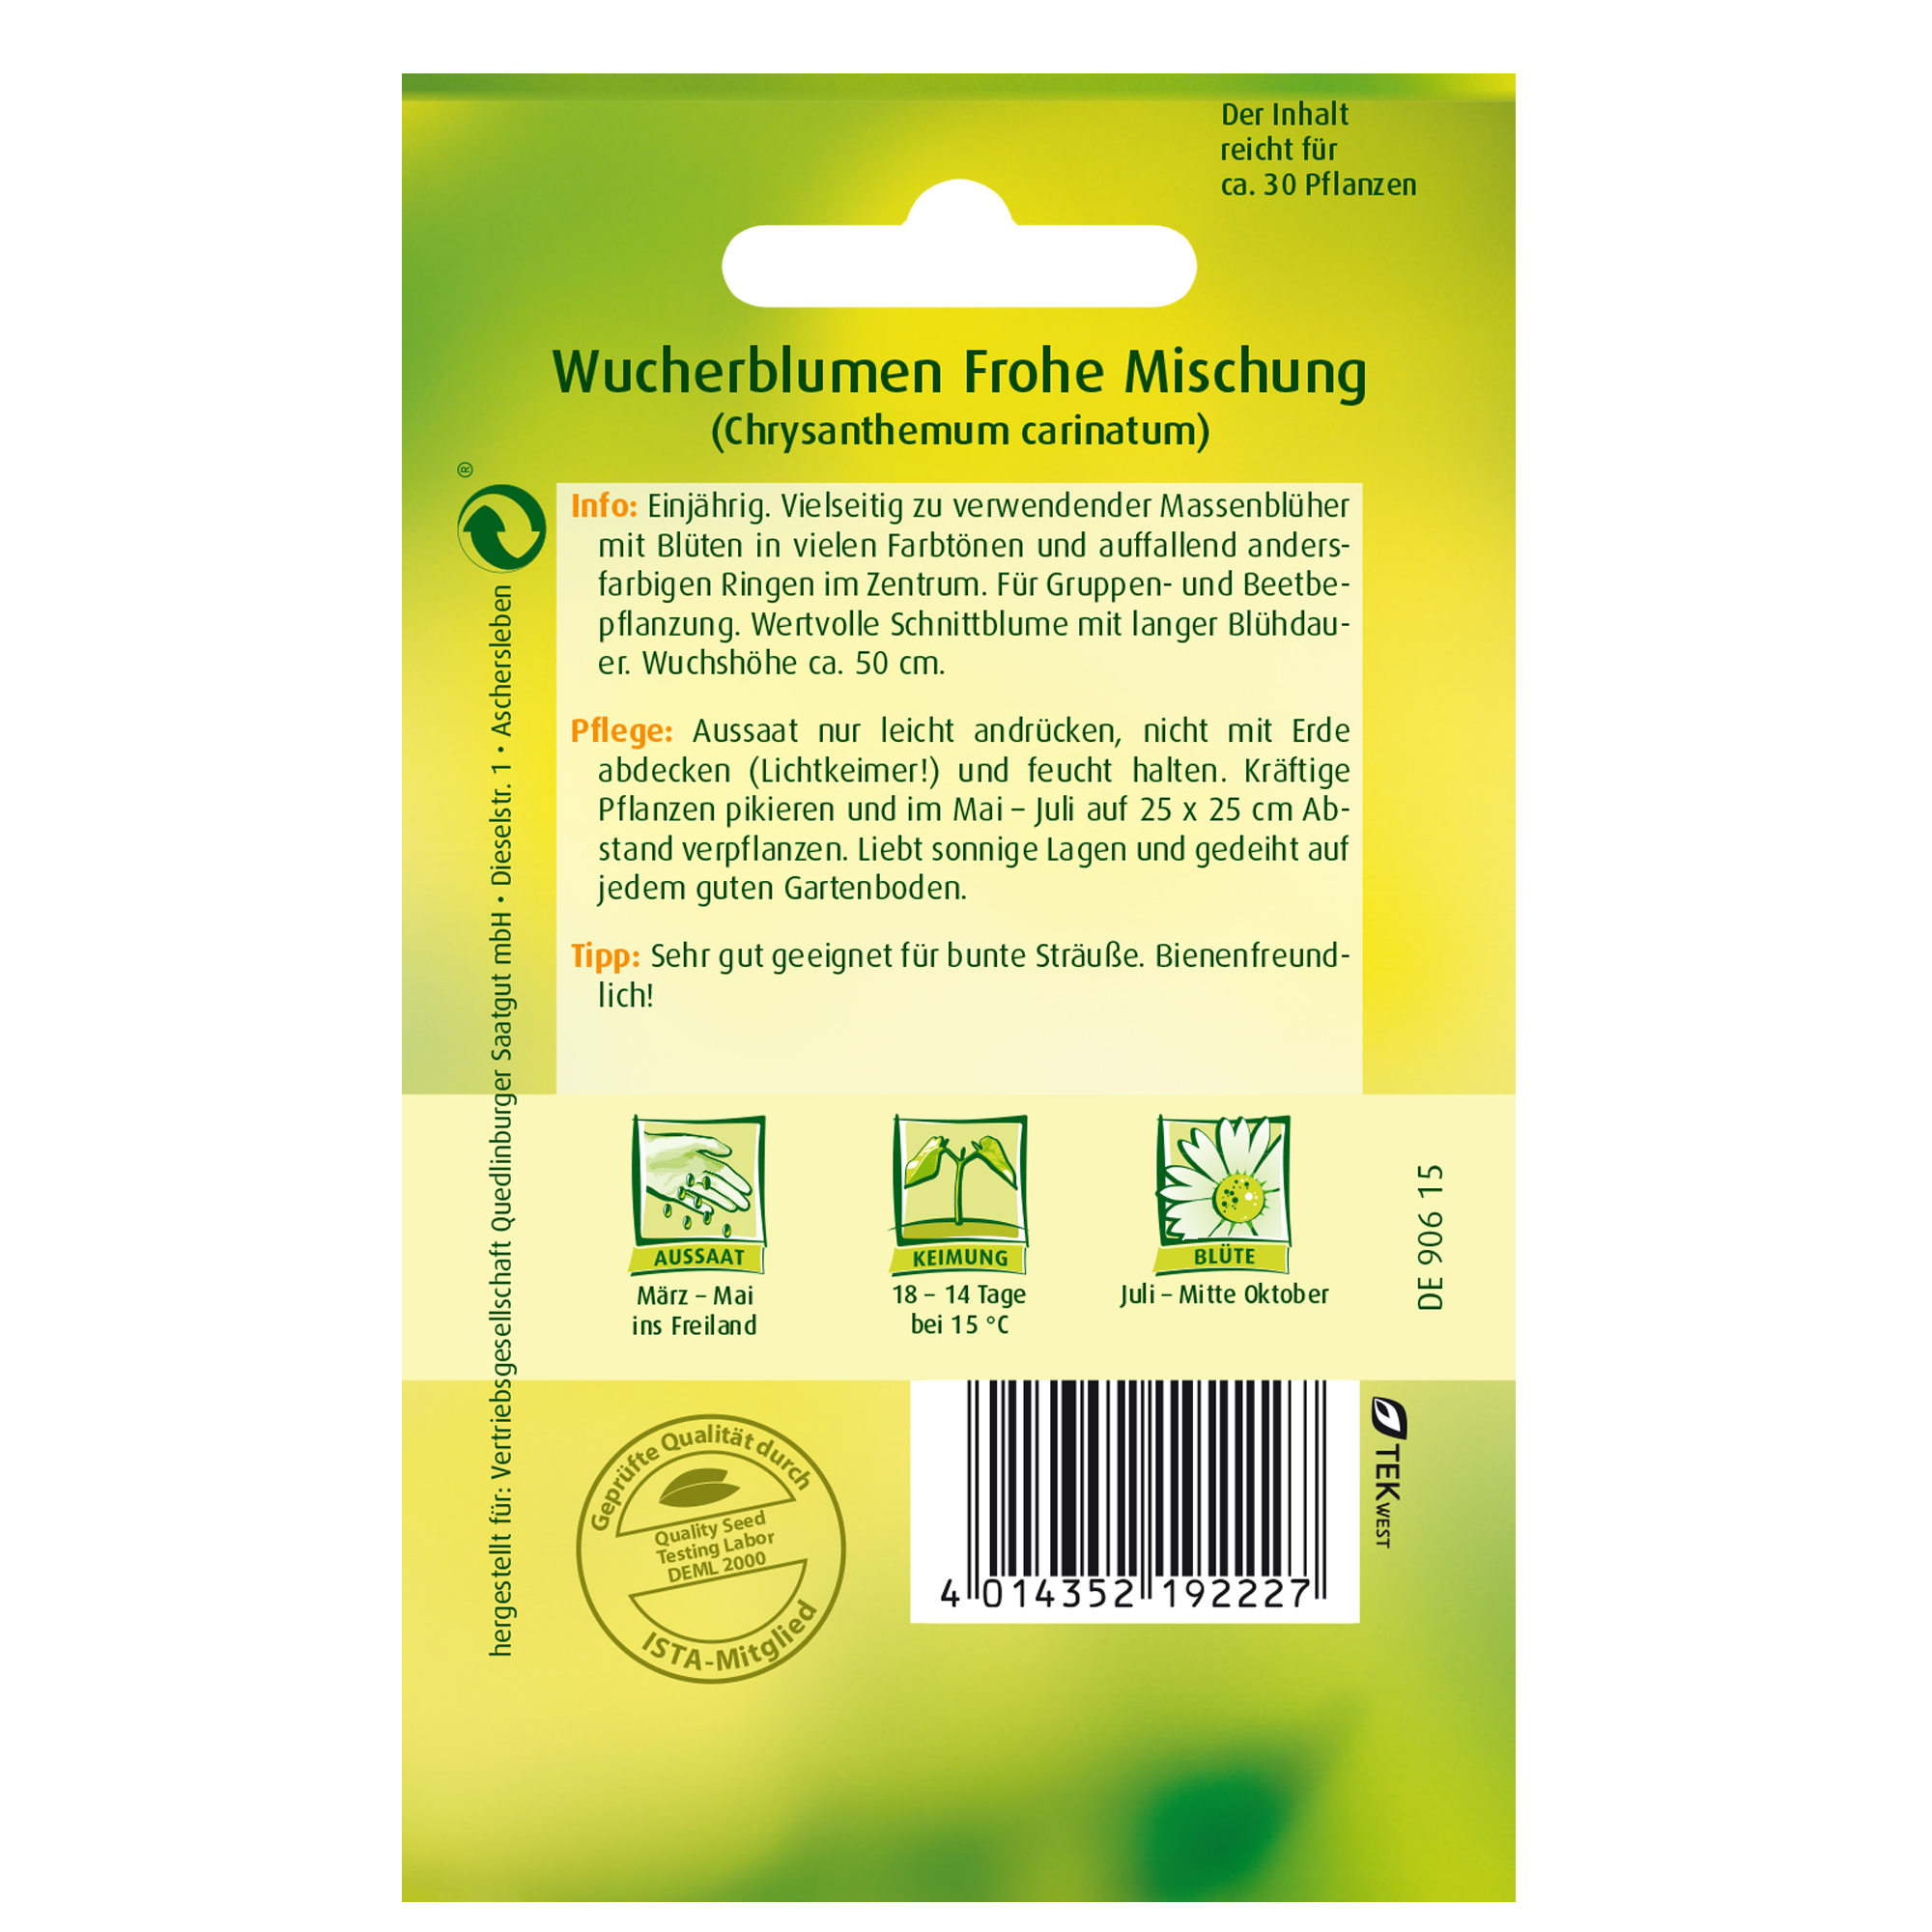 Wucherblumen 'Frohe Mischung' + product picture